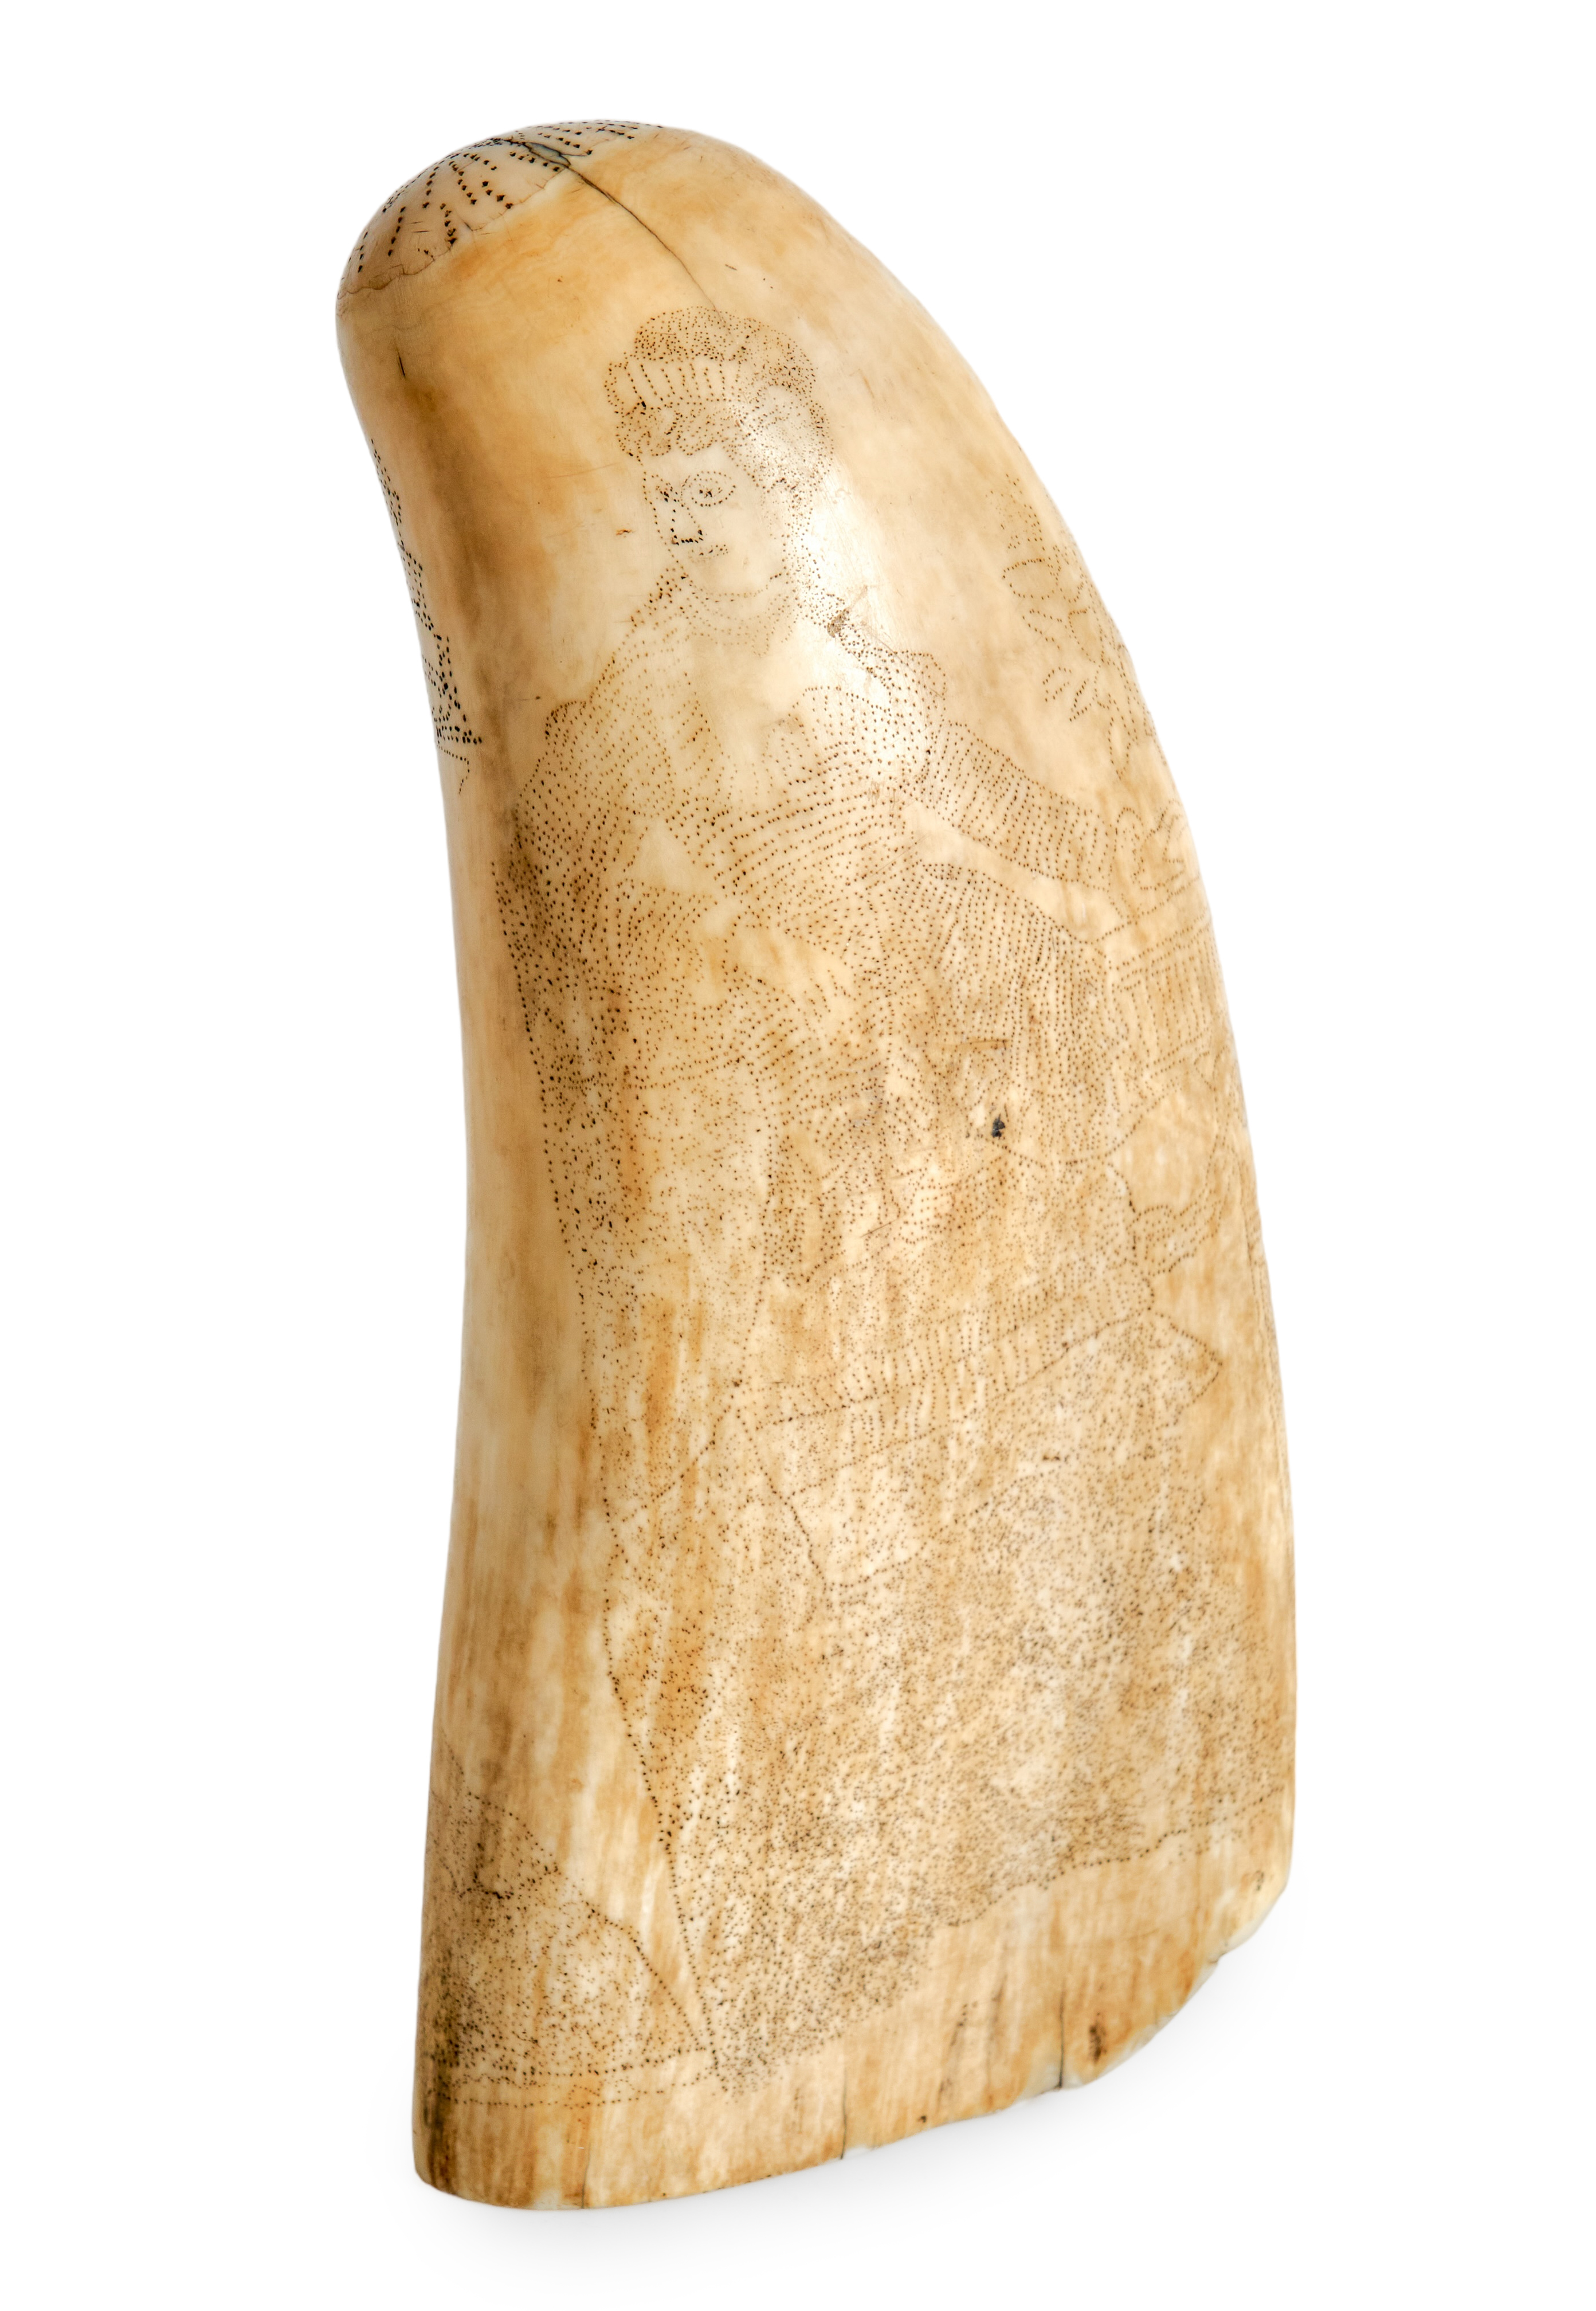 19th C Polychrome scrimshaw whales tooth,